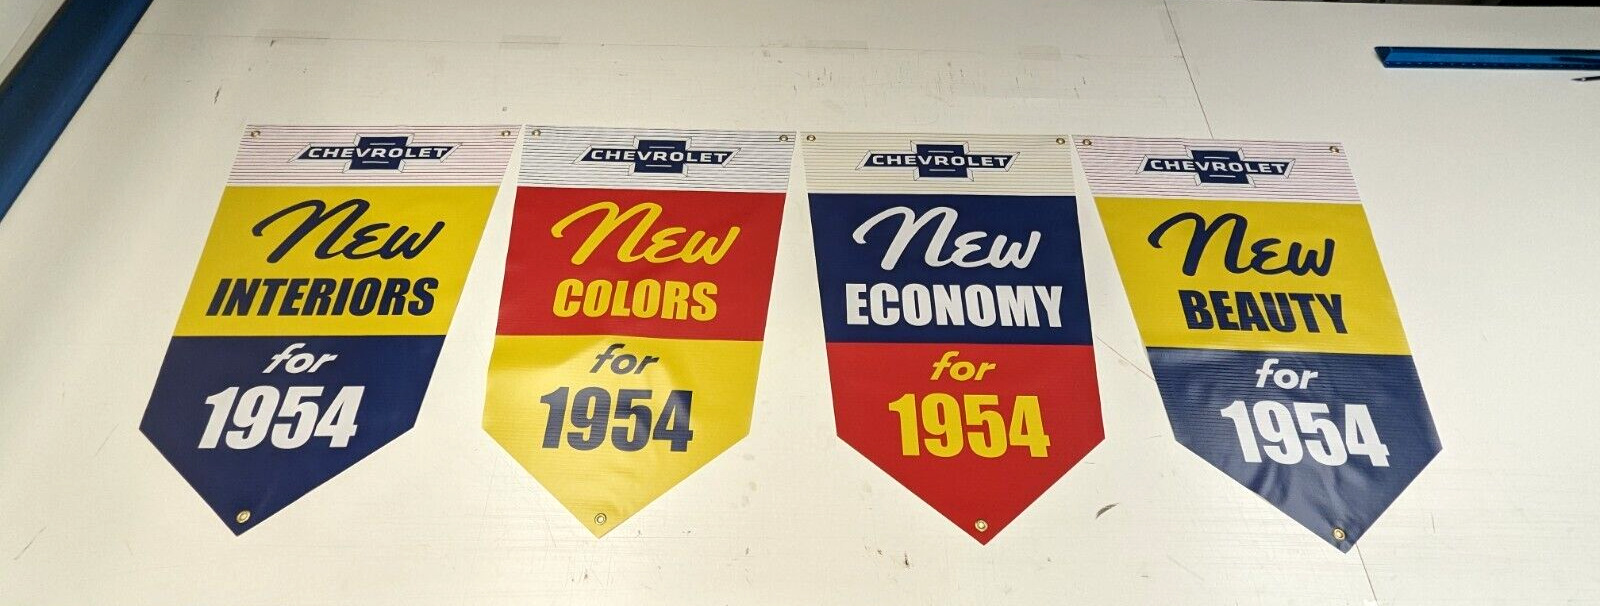 \'54 Chevrolet Lot of 4 Vintage Style Dealer Promo Banners Chevy 1954 Set